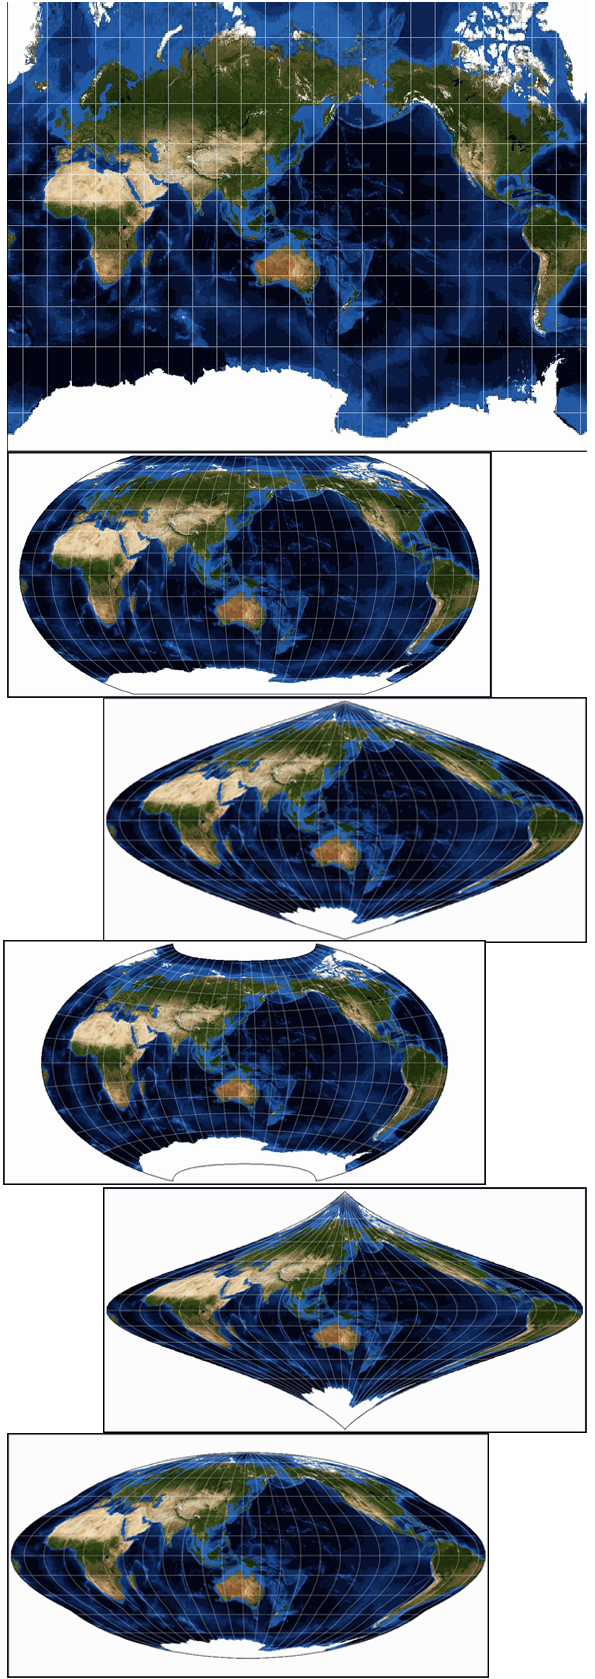 World maps showing different projections